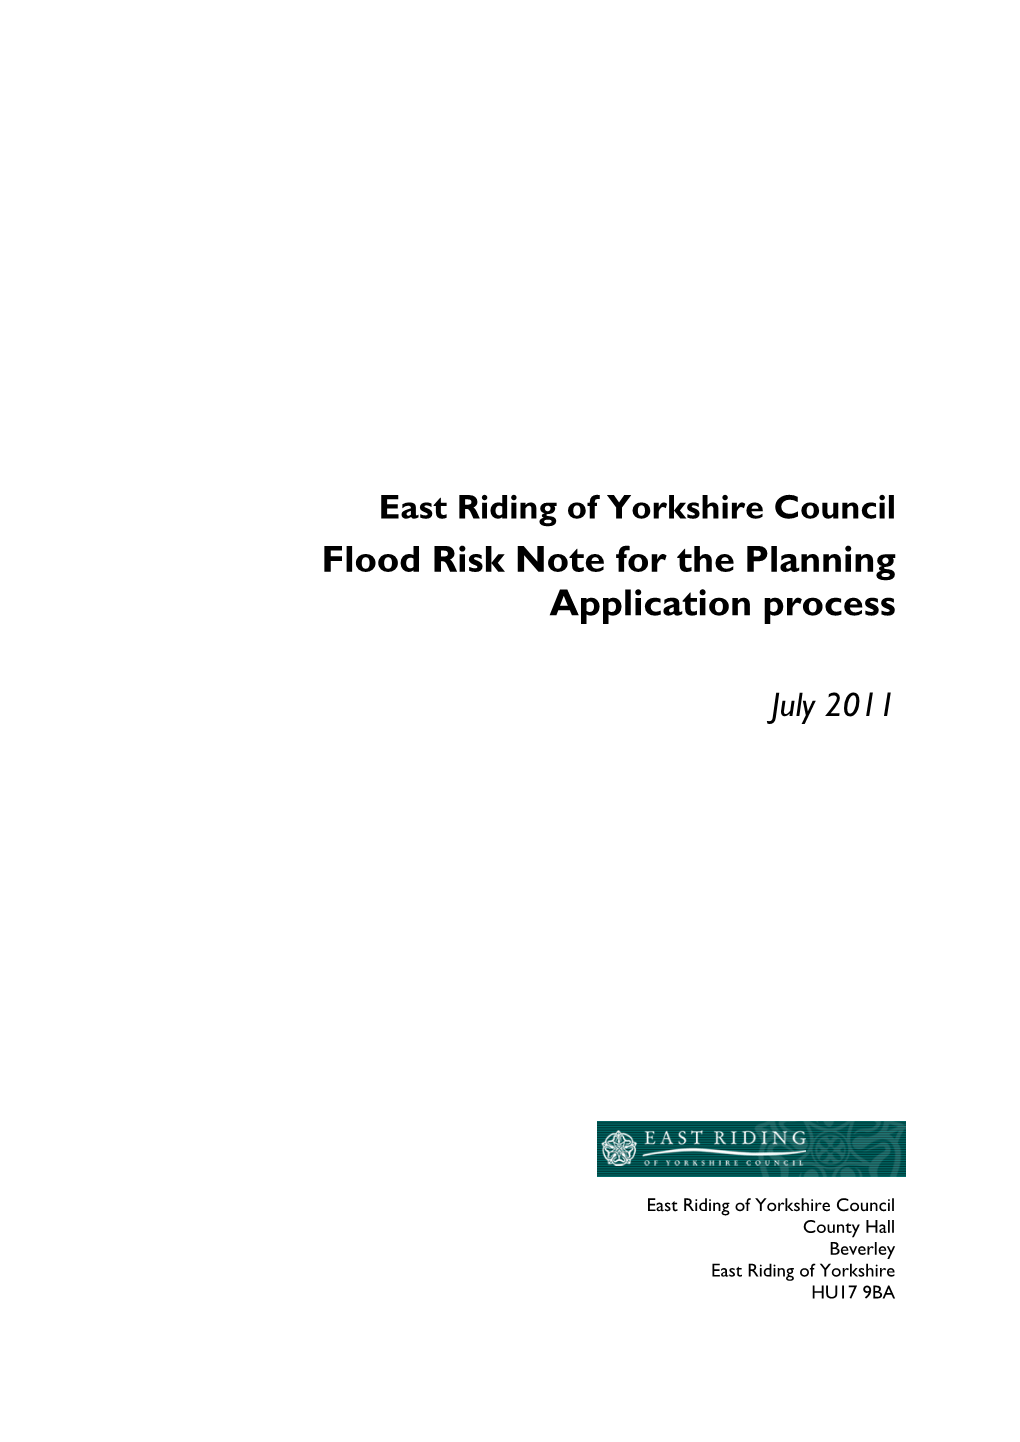 East Riding of Yorkshire Council Flood Risk Note for the Planning Application Process